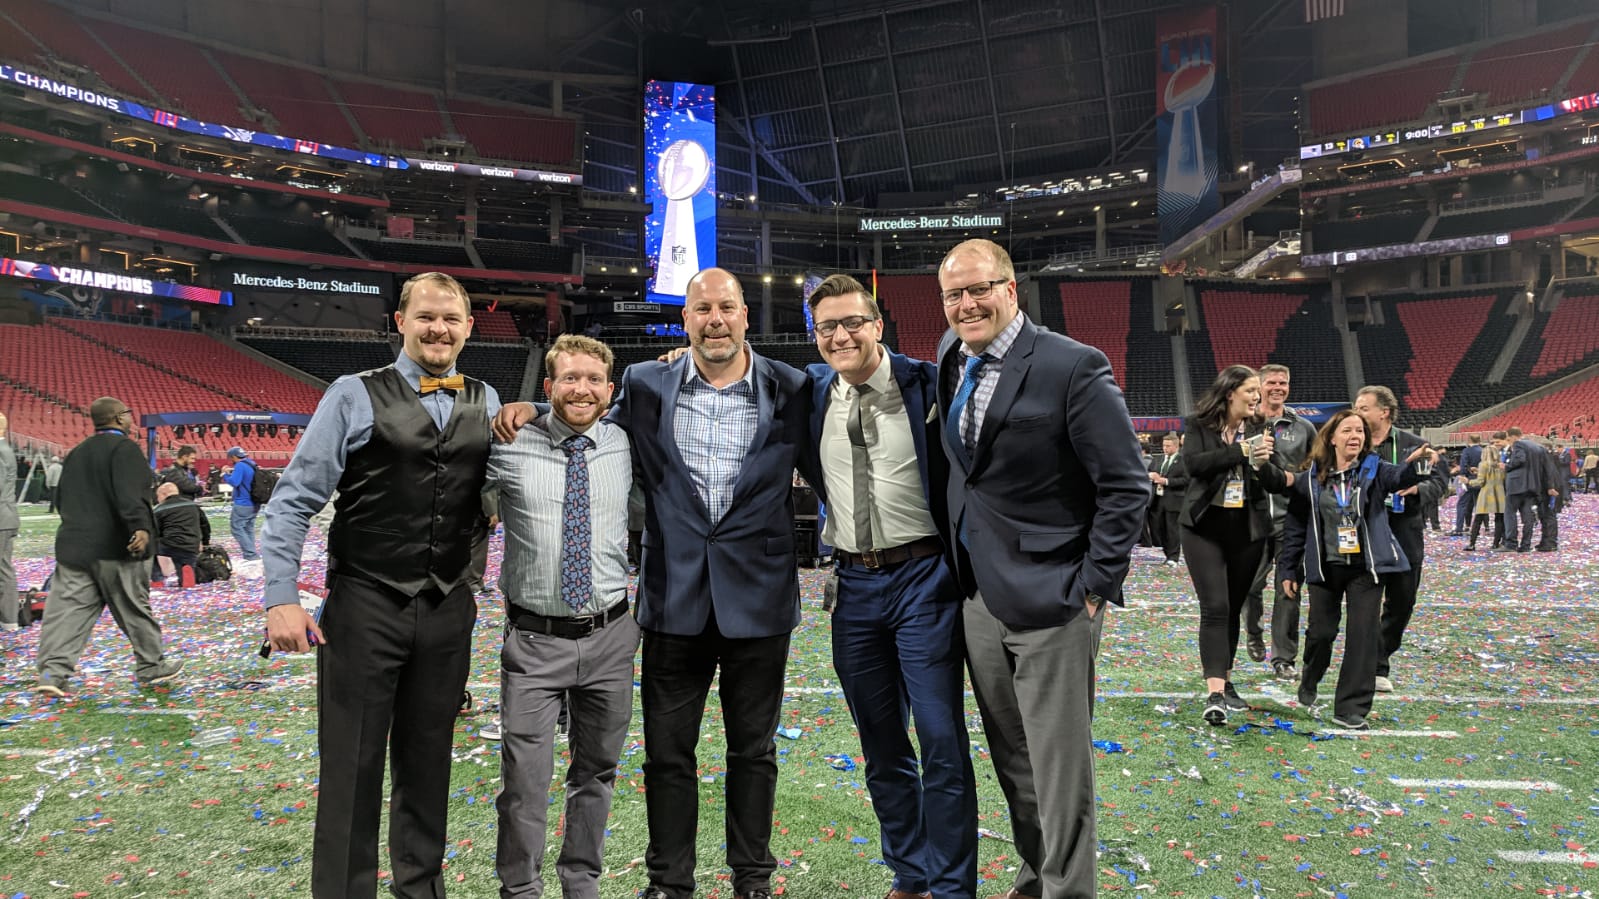 Ross staff on the field at Mercedes Benz Stadium